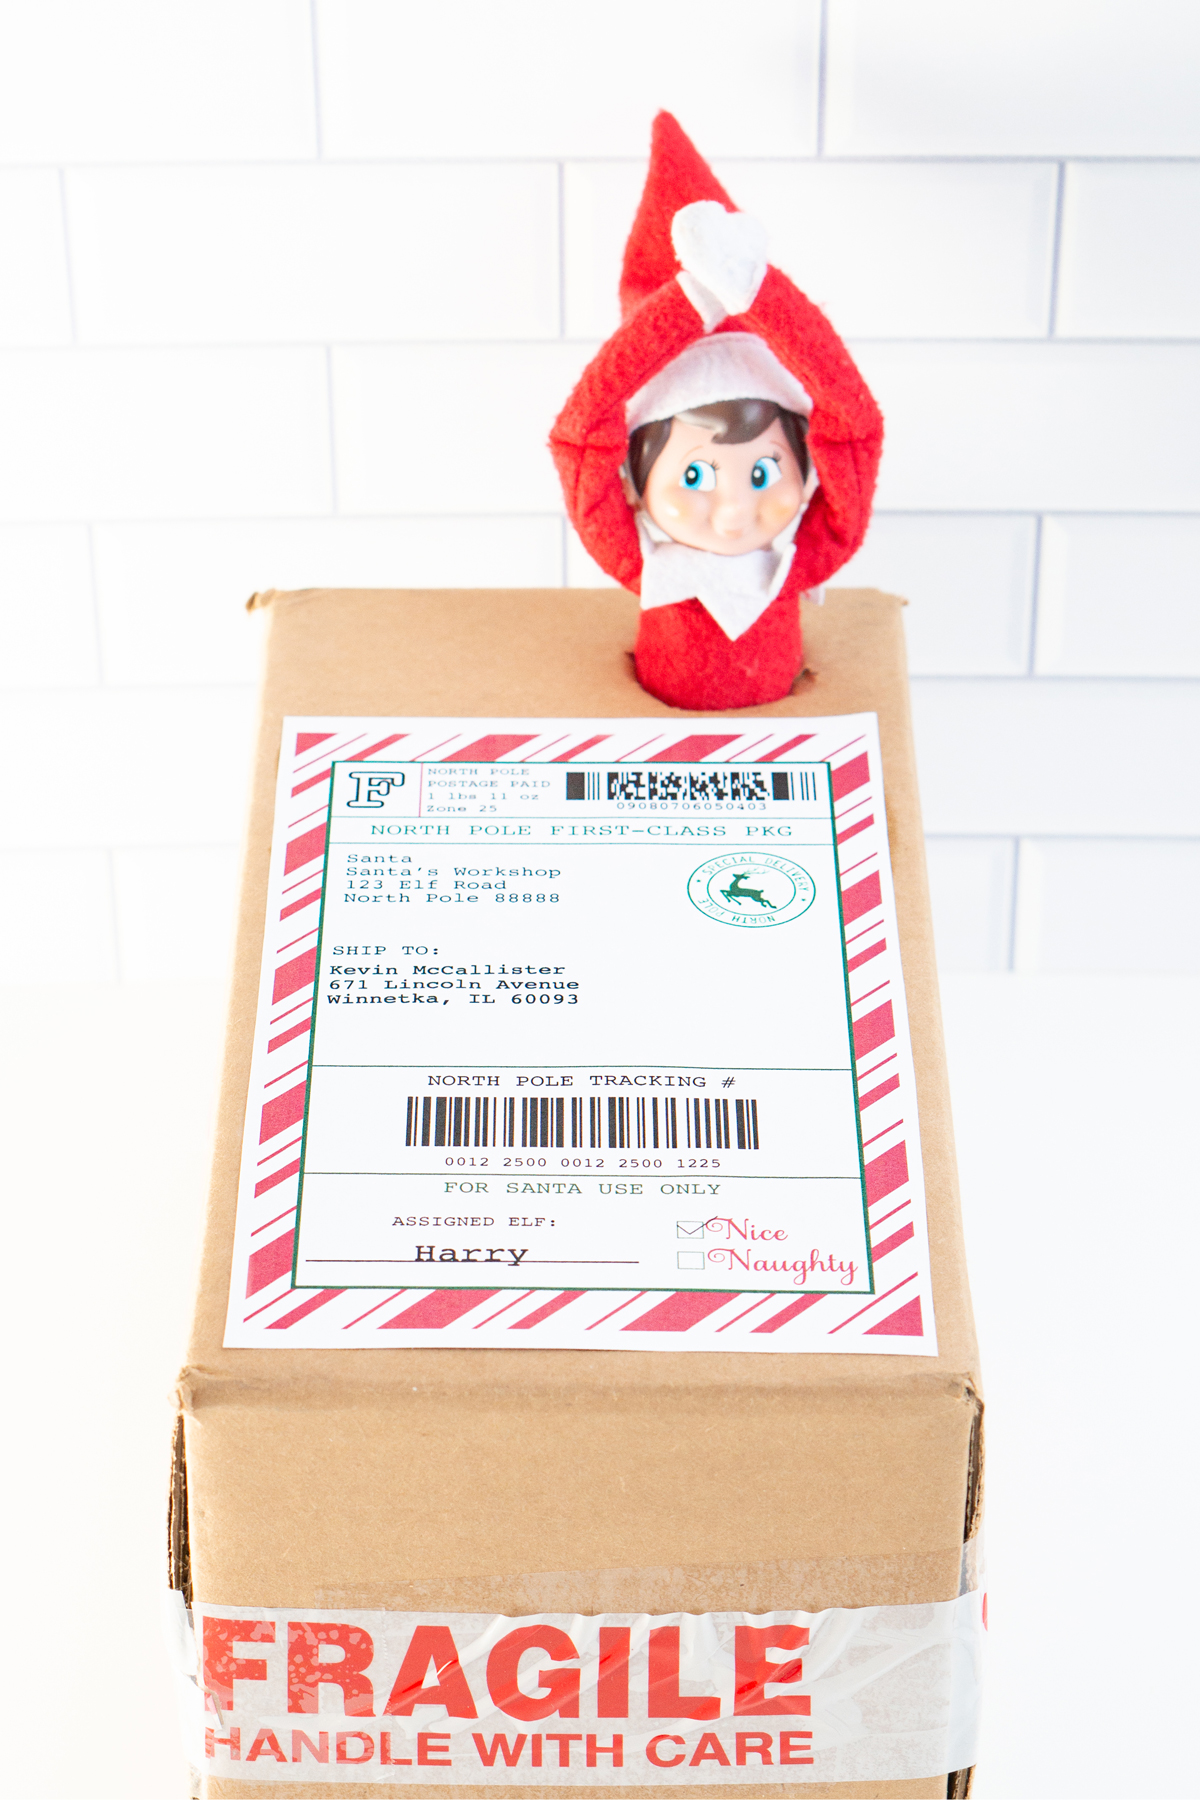 This image shows an example of the free Elf on the shelf mailing label you can download for free in this blog post on a shipping box with an Elf on the Shelf doll escaping out of the top of the box.